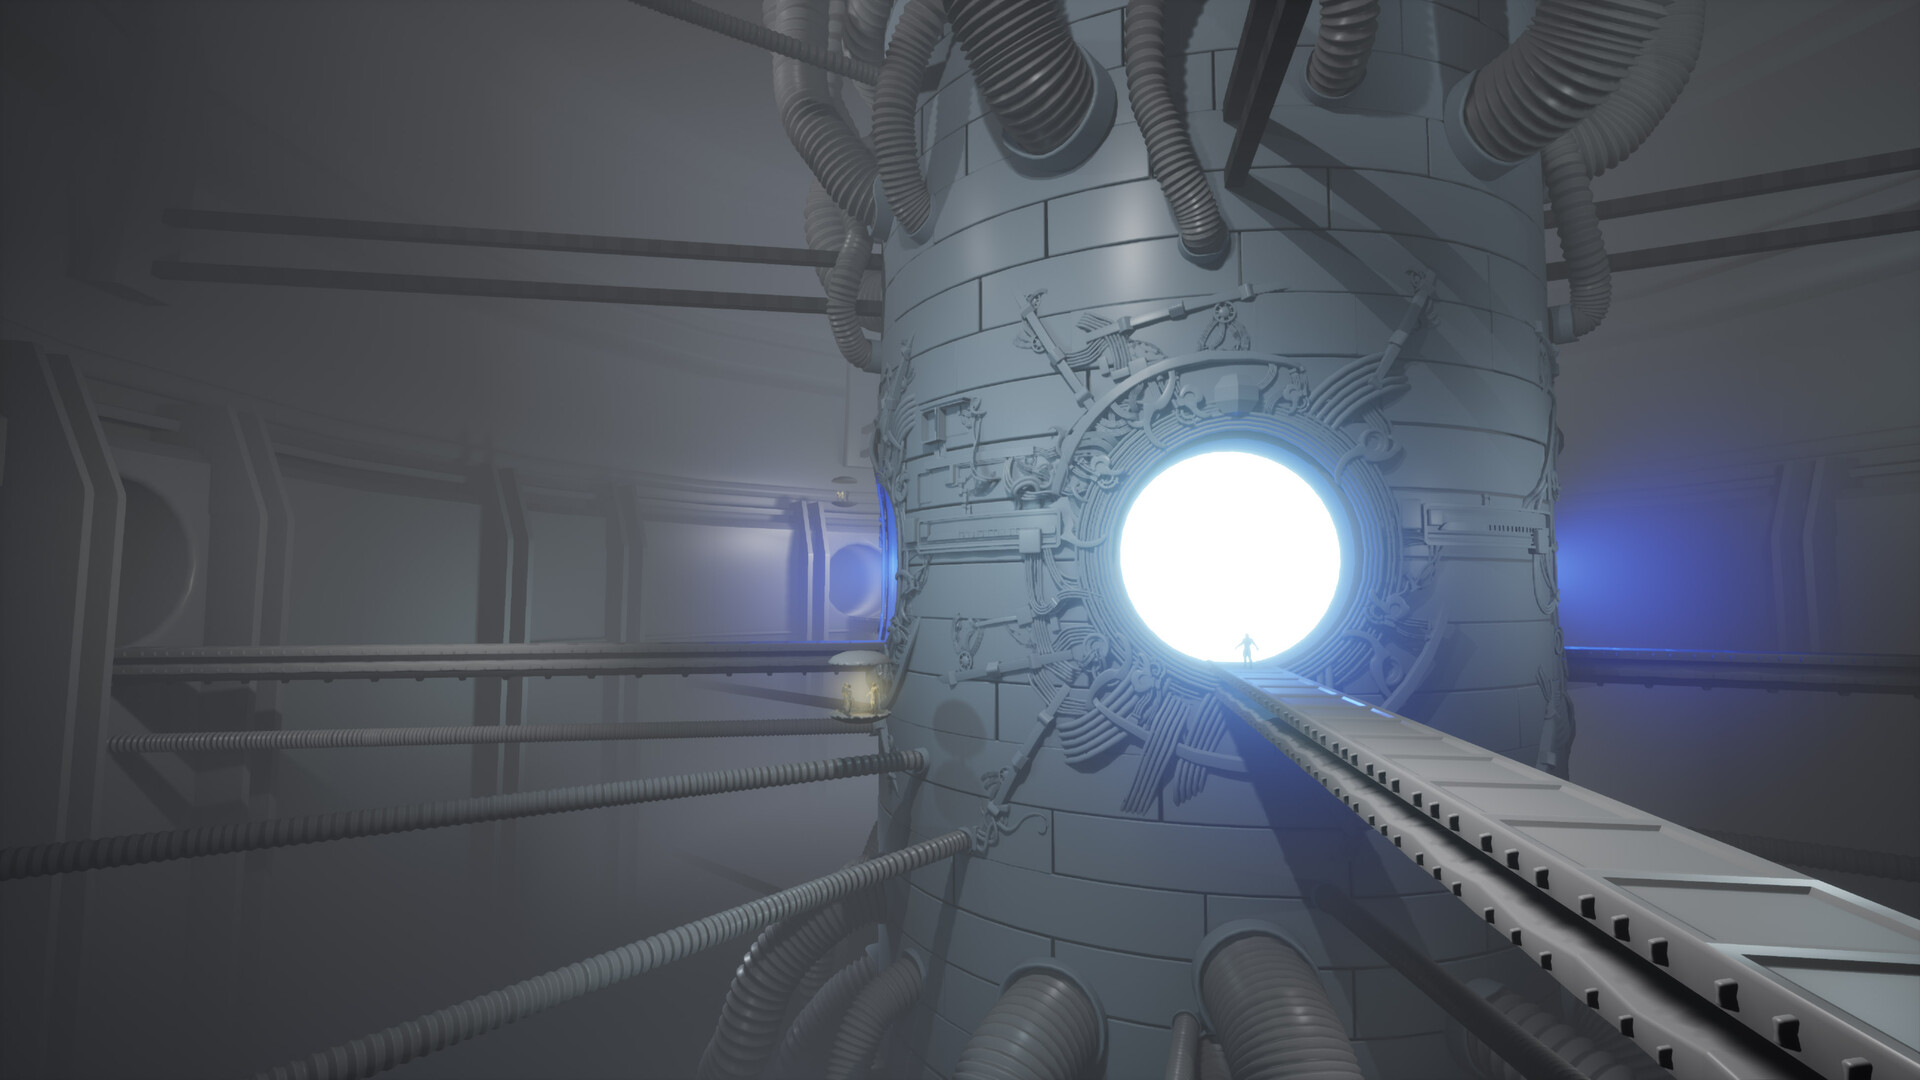 Another angle from UE4. The cylindrical device, with a metal platform to the right. The openings of the portals spill an overpowering, saturated blue color in the volumetric air.